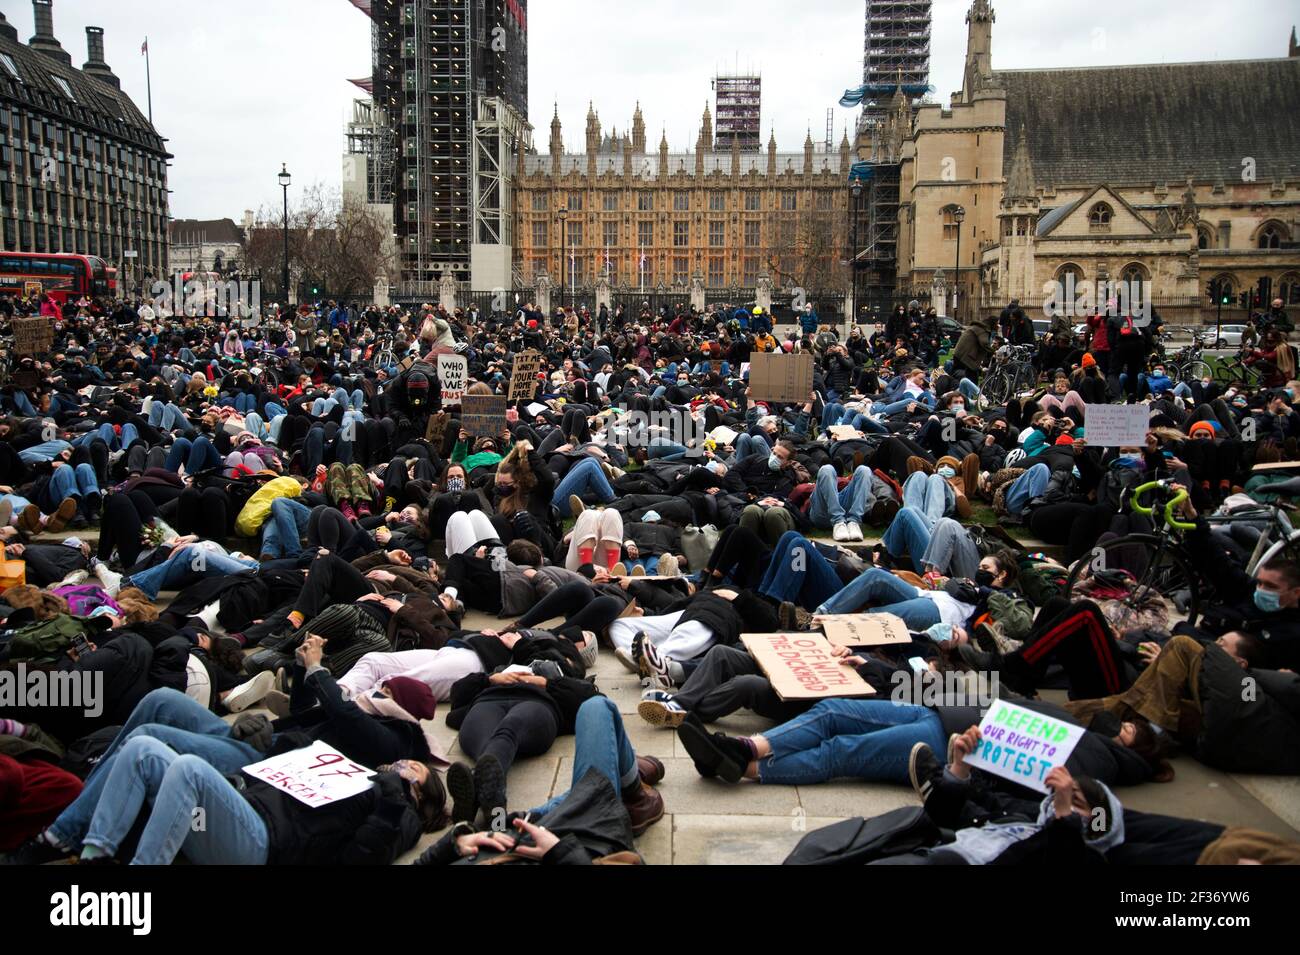 Parliament Square. 14/03/2021. Protest over the heavy handed policing of the vigil on Clapham Common for Sarah Everard the night before...everyone lay Stock Photo